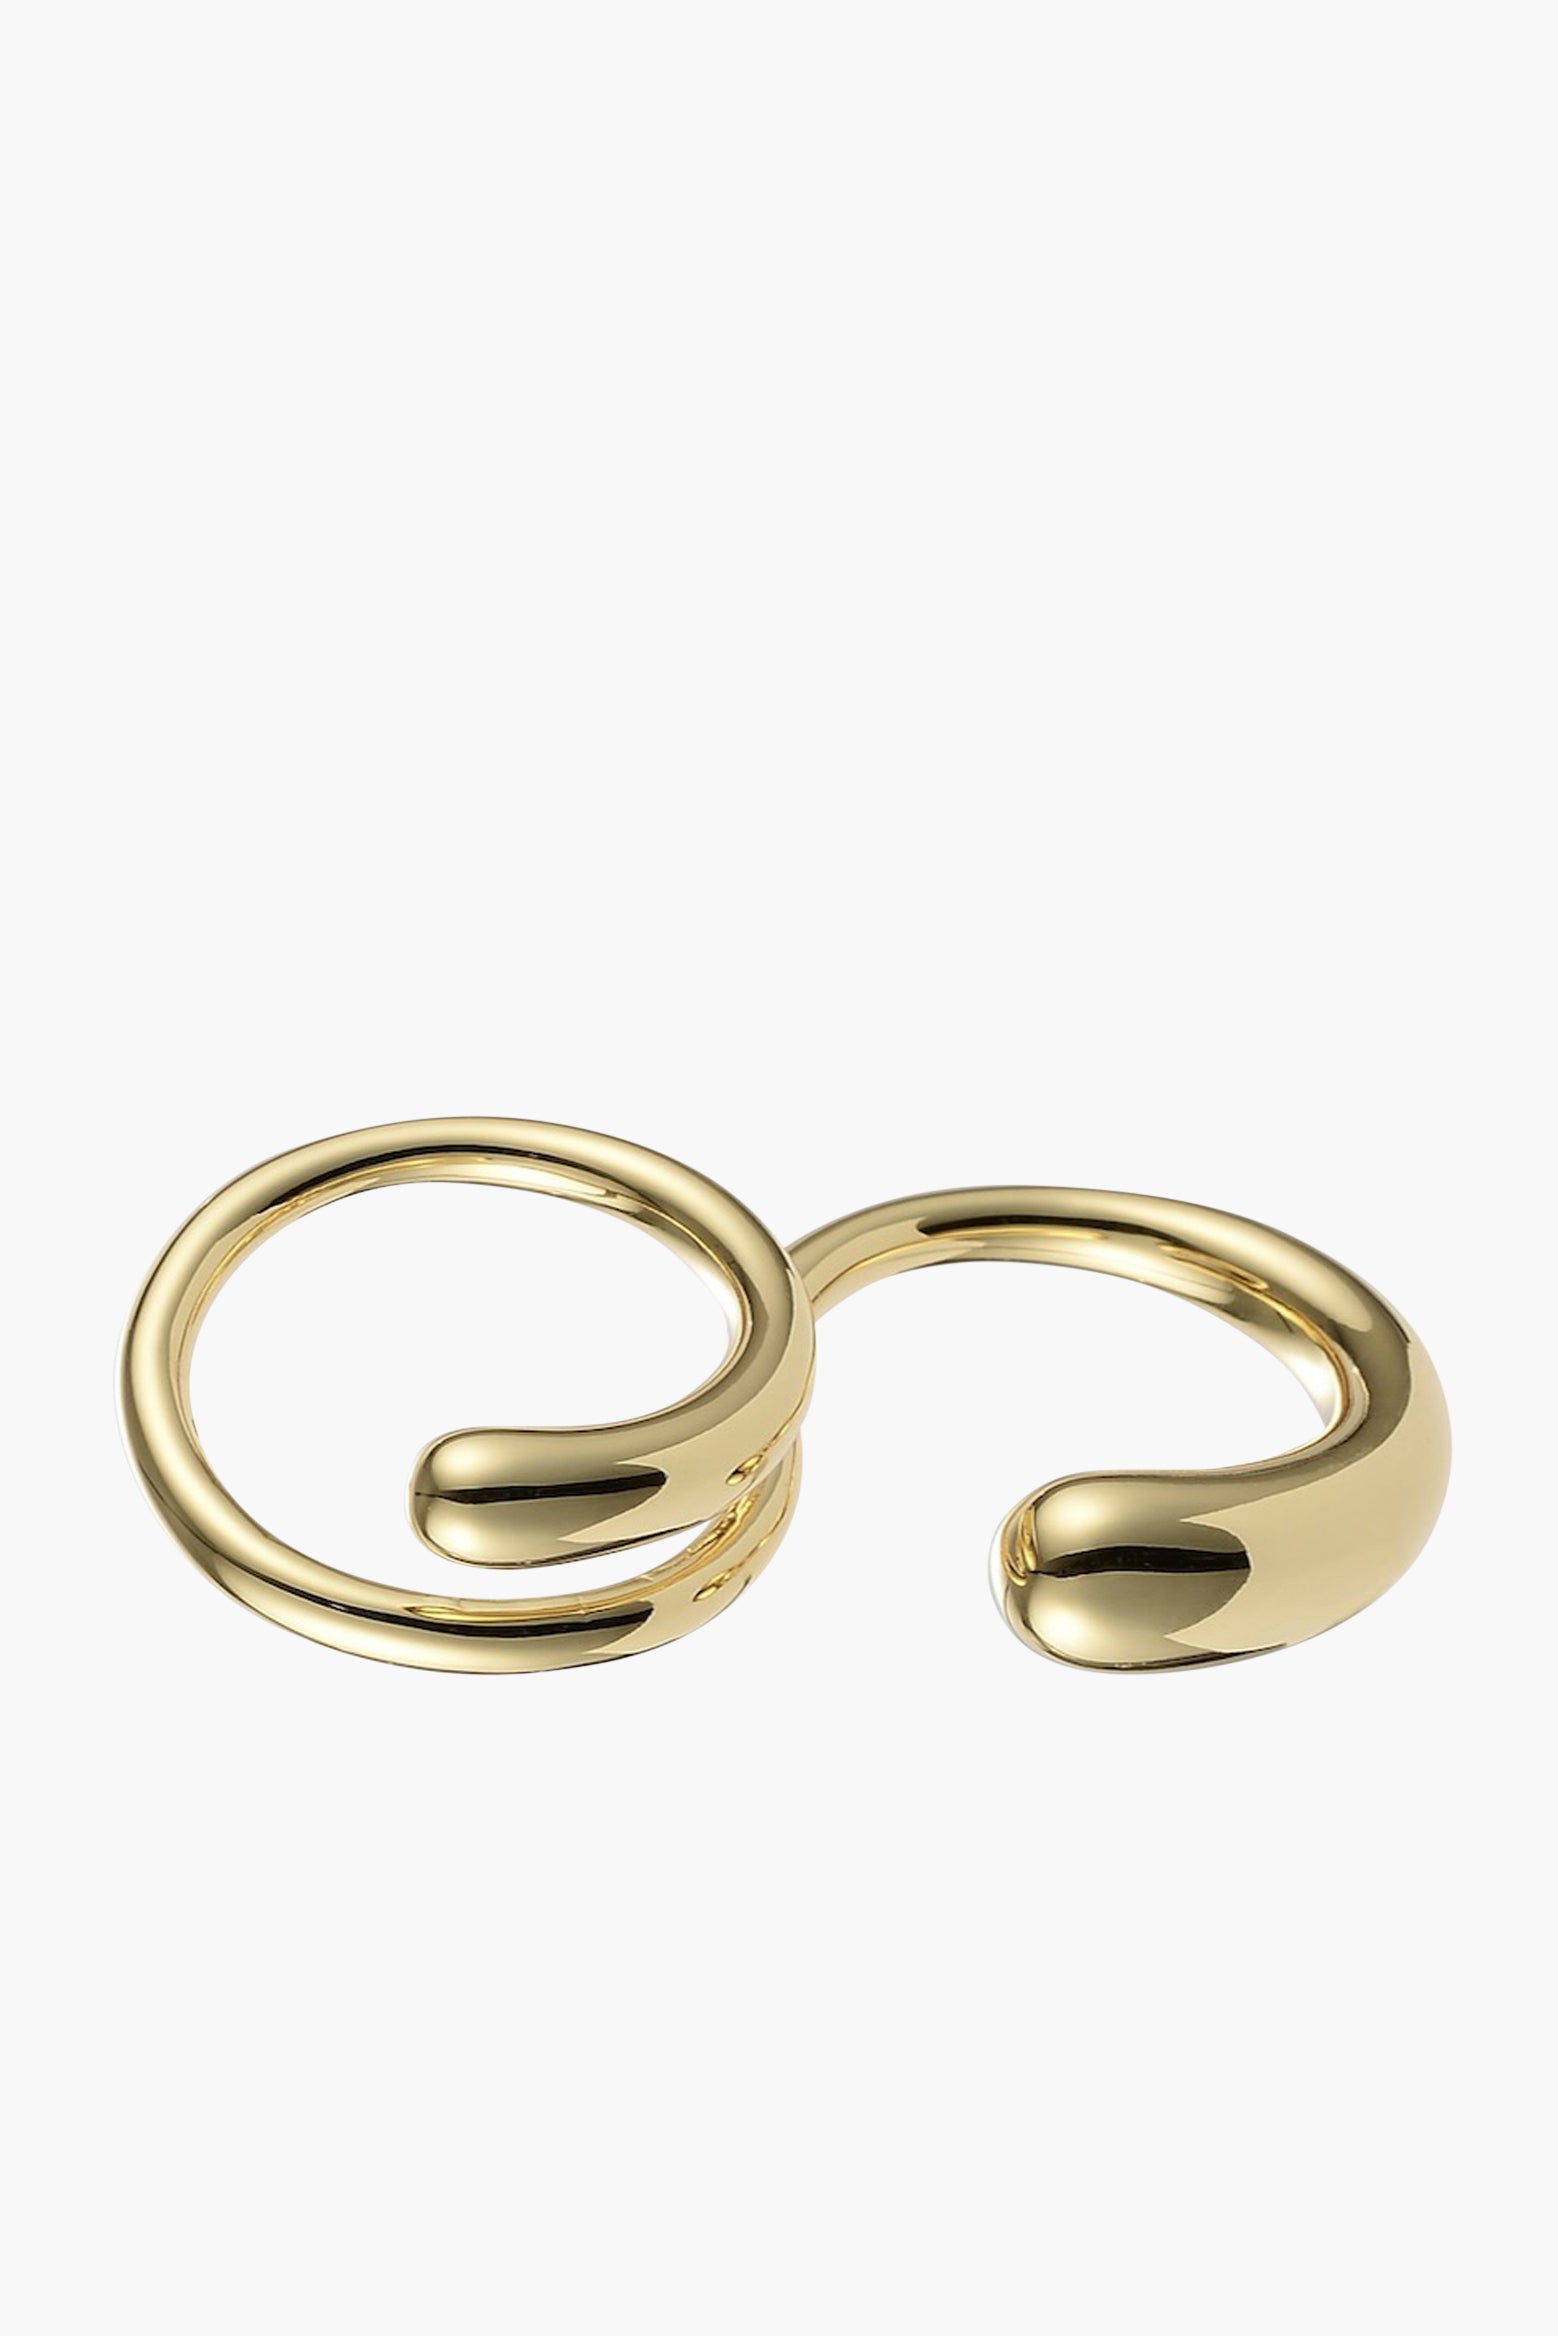 Anna Rossi Two Fold Ring in Gold available at TNT The New Trend Australia